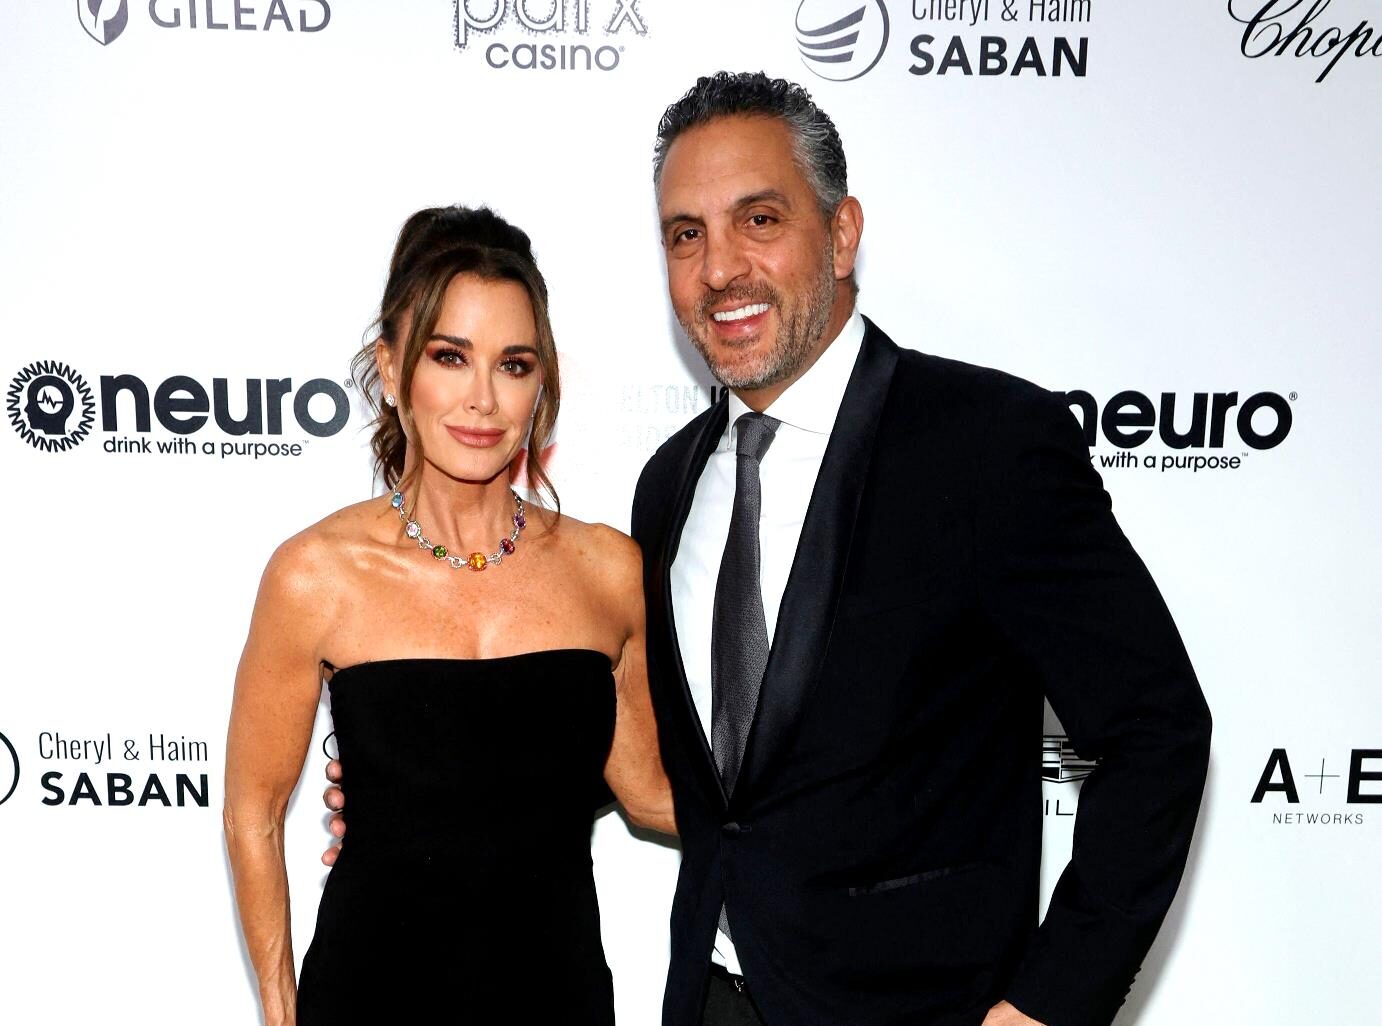 PHOTO: RHOBH's Kyle Richards and Mauricio Umansky Caught Looking "Very Cozy" at Aspen Restaurant Amid Alleged Separation and Morgan Wade Rumors